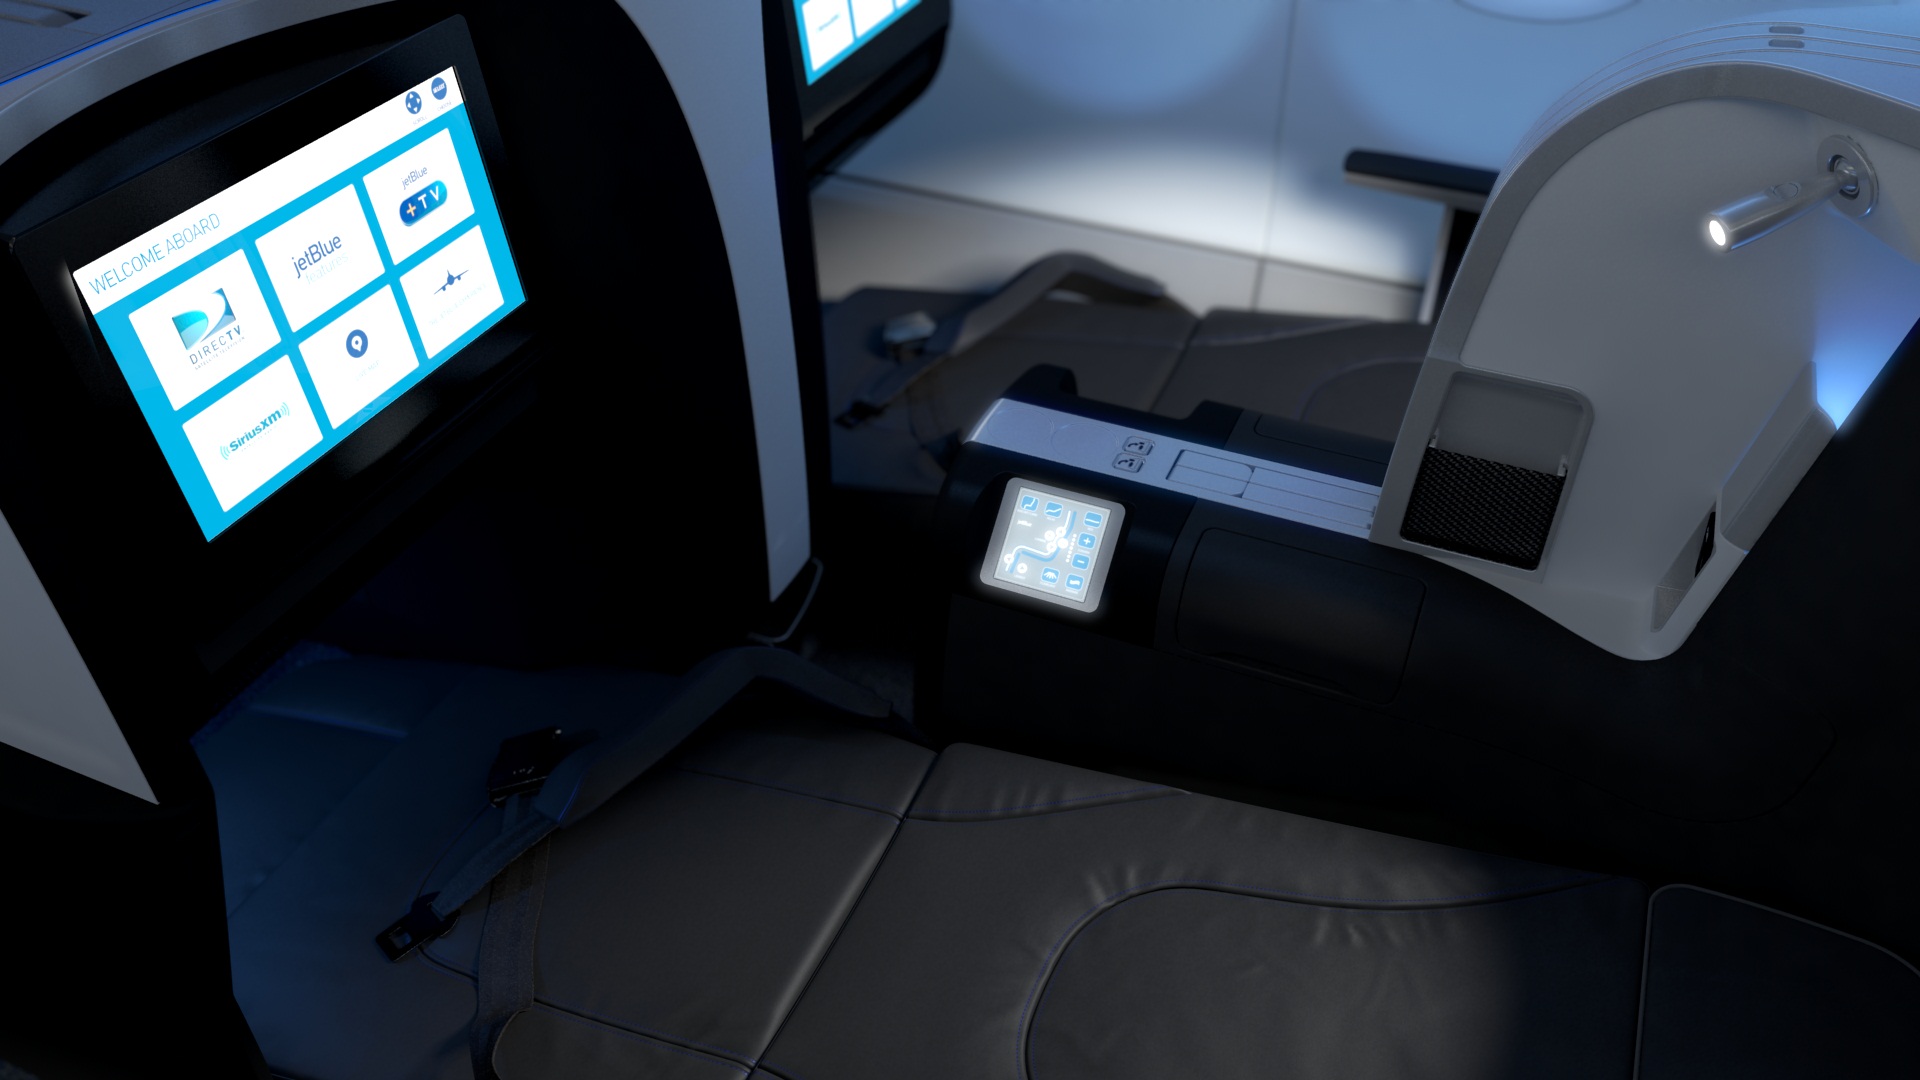 The entertainment system in the new seat offers the most live entertainment on-board a plane.